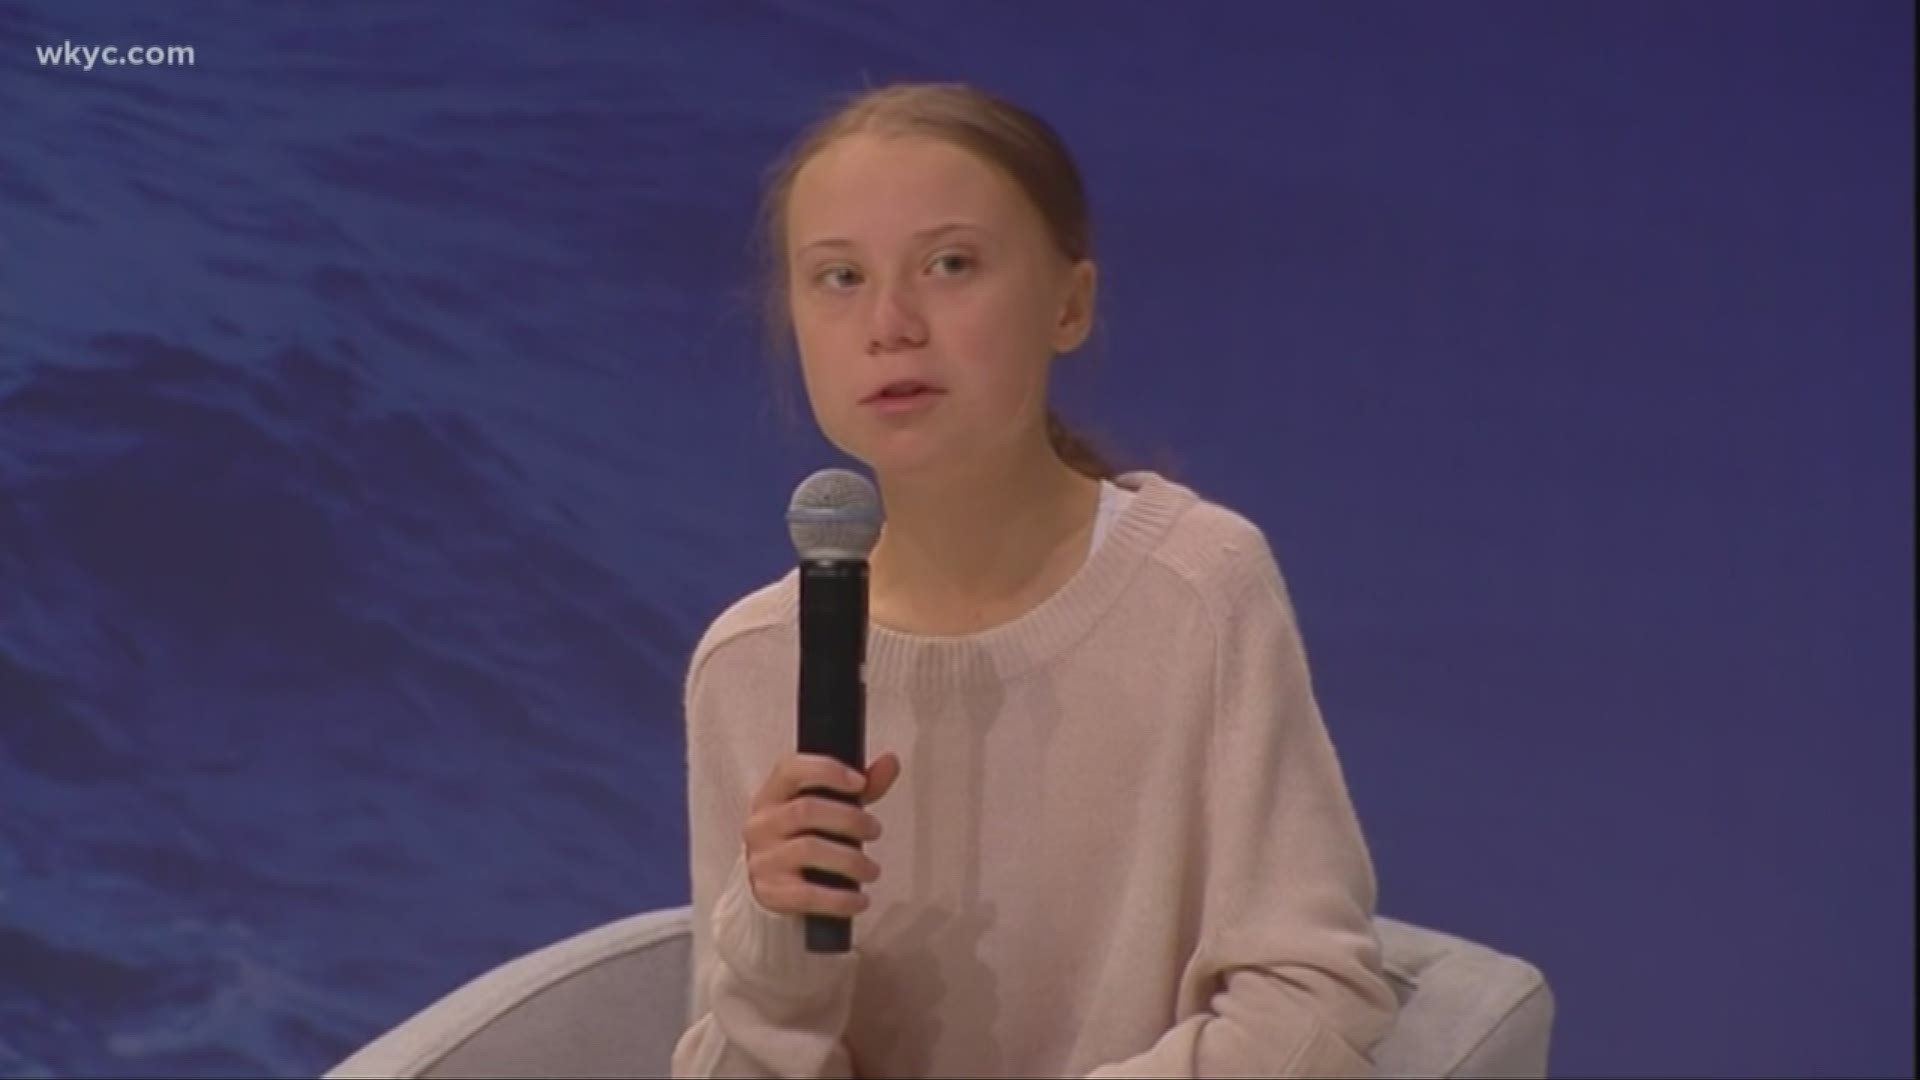 Thunberg is the youngest person ever to be named TIME Magazine's Person of the Year.